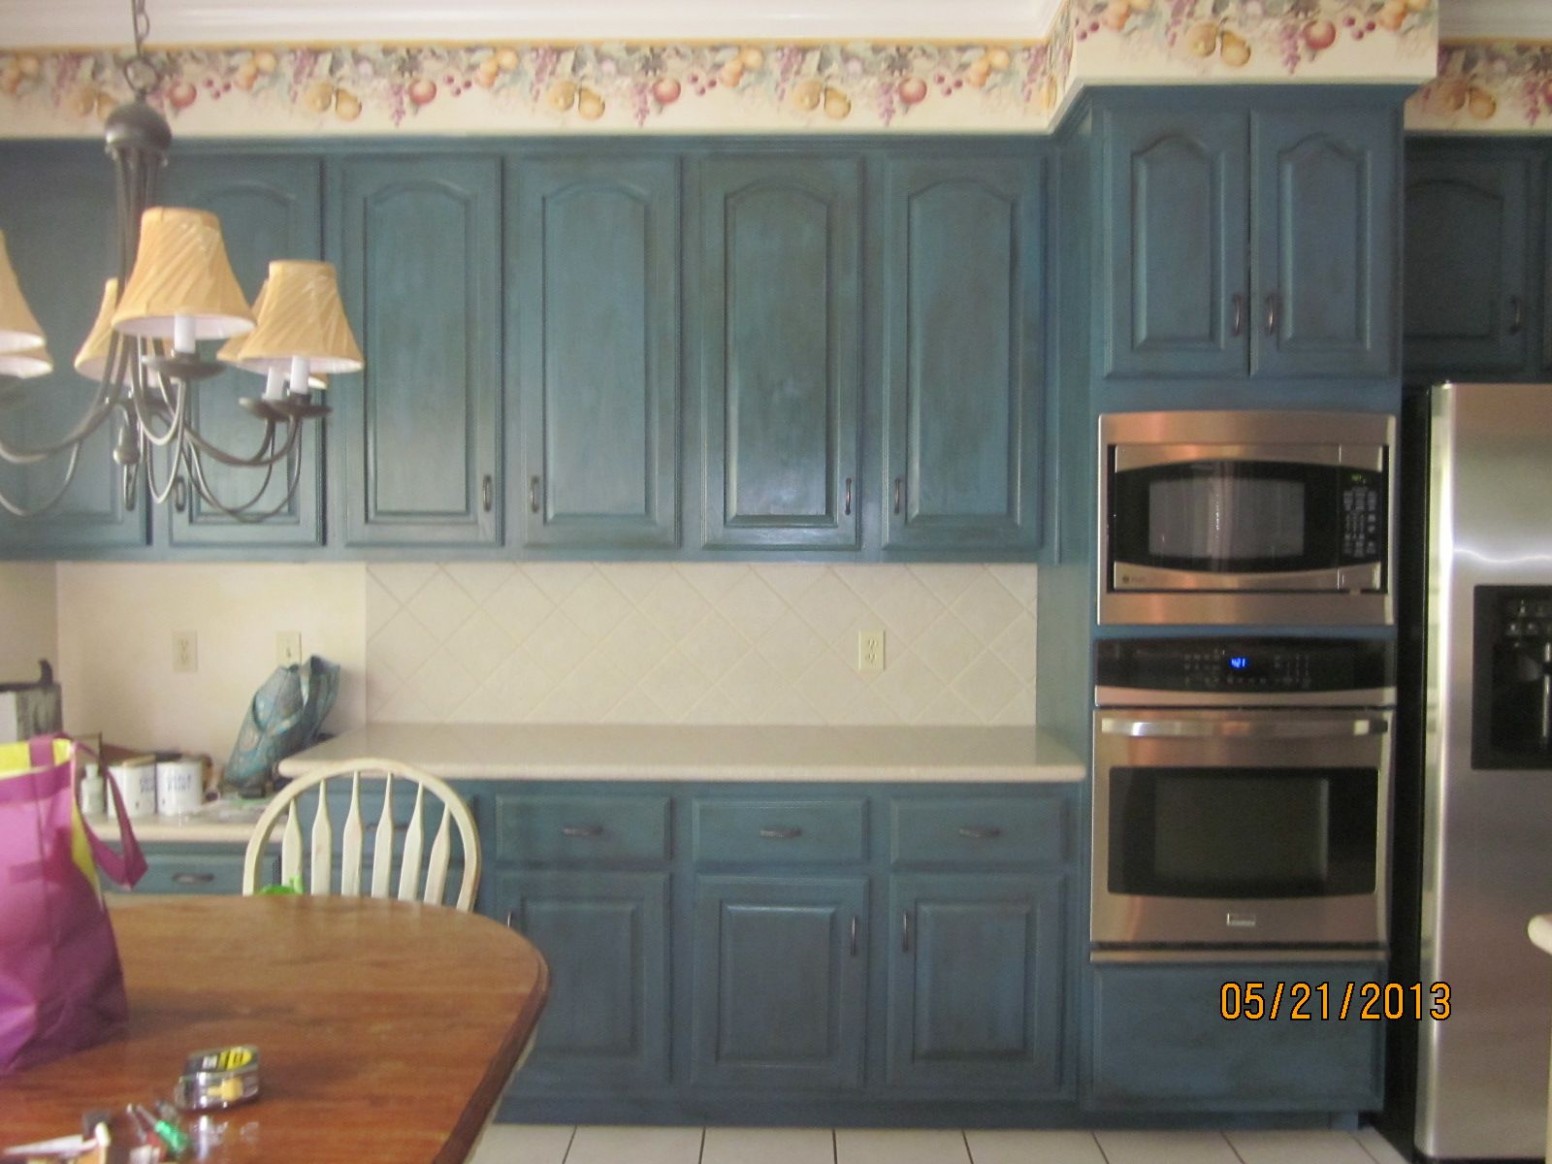 Kitchen Cabinets Painted. She Used Annie Sloan Chalk Paint ..